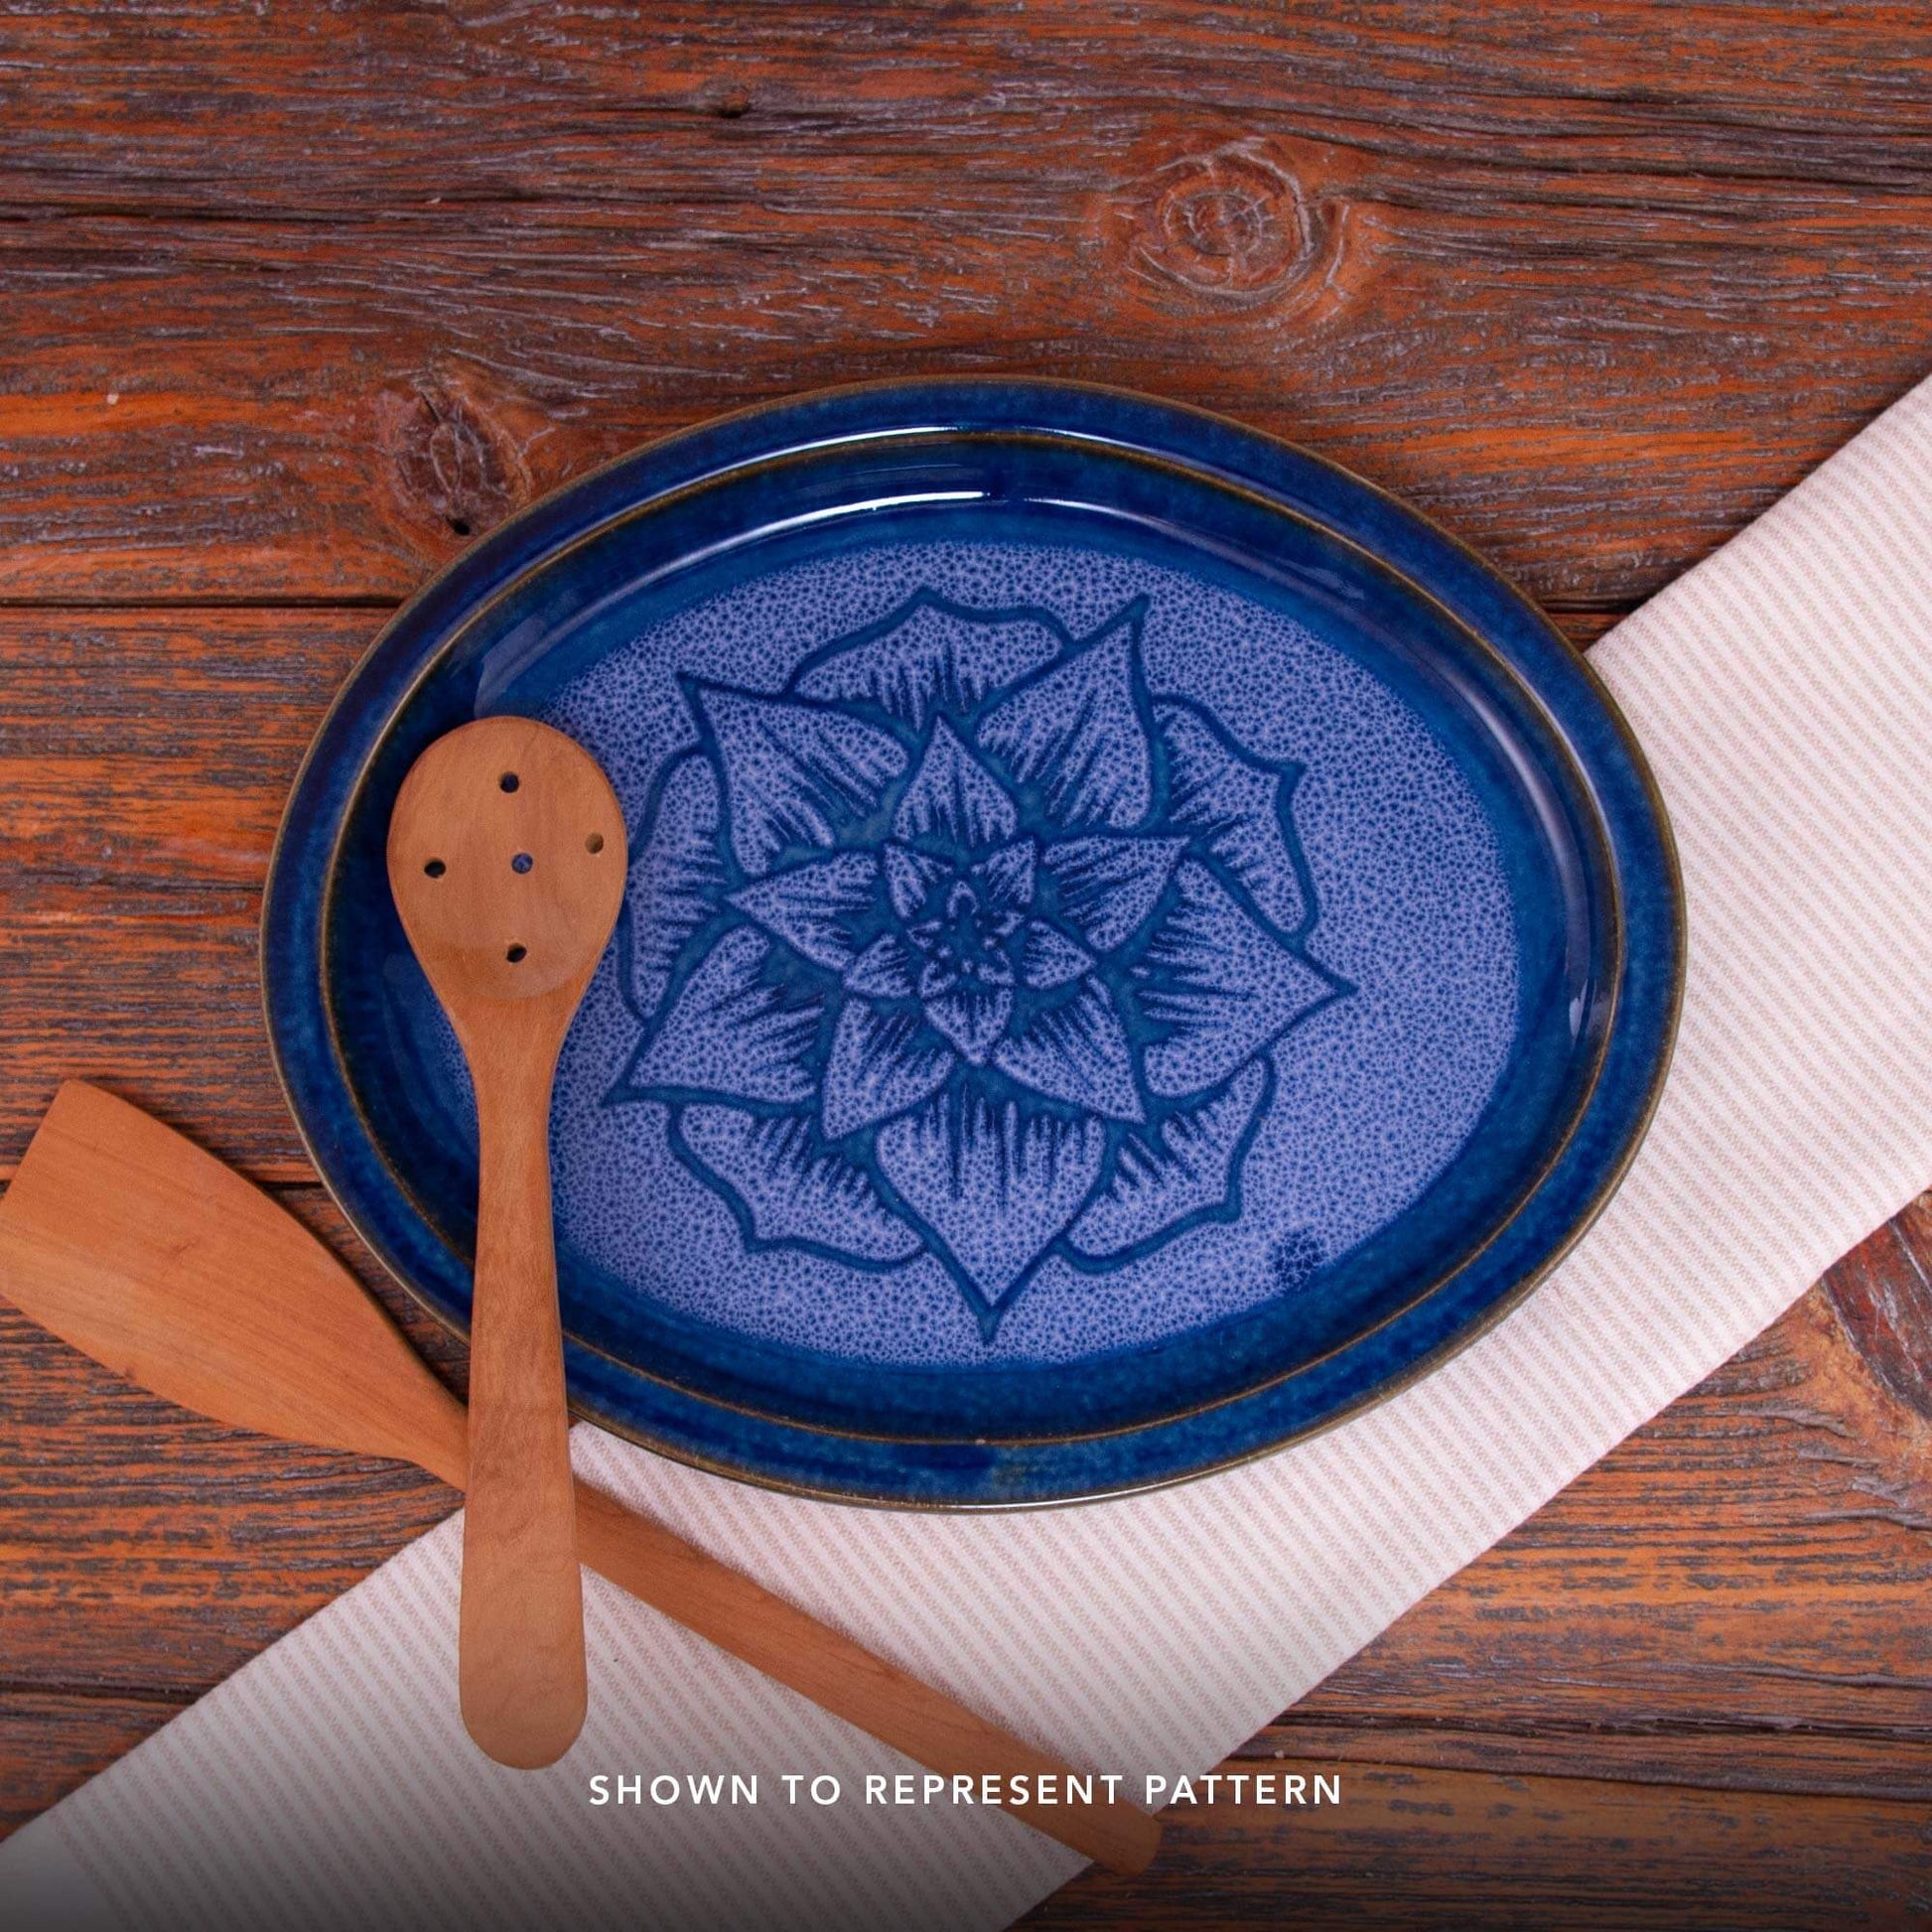 Handmade Pottery Harvest Bowl in Blue Celtic Flower pattern made by Georgetown Pottery in Maine